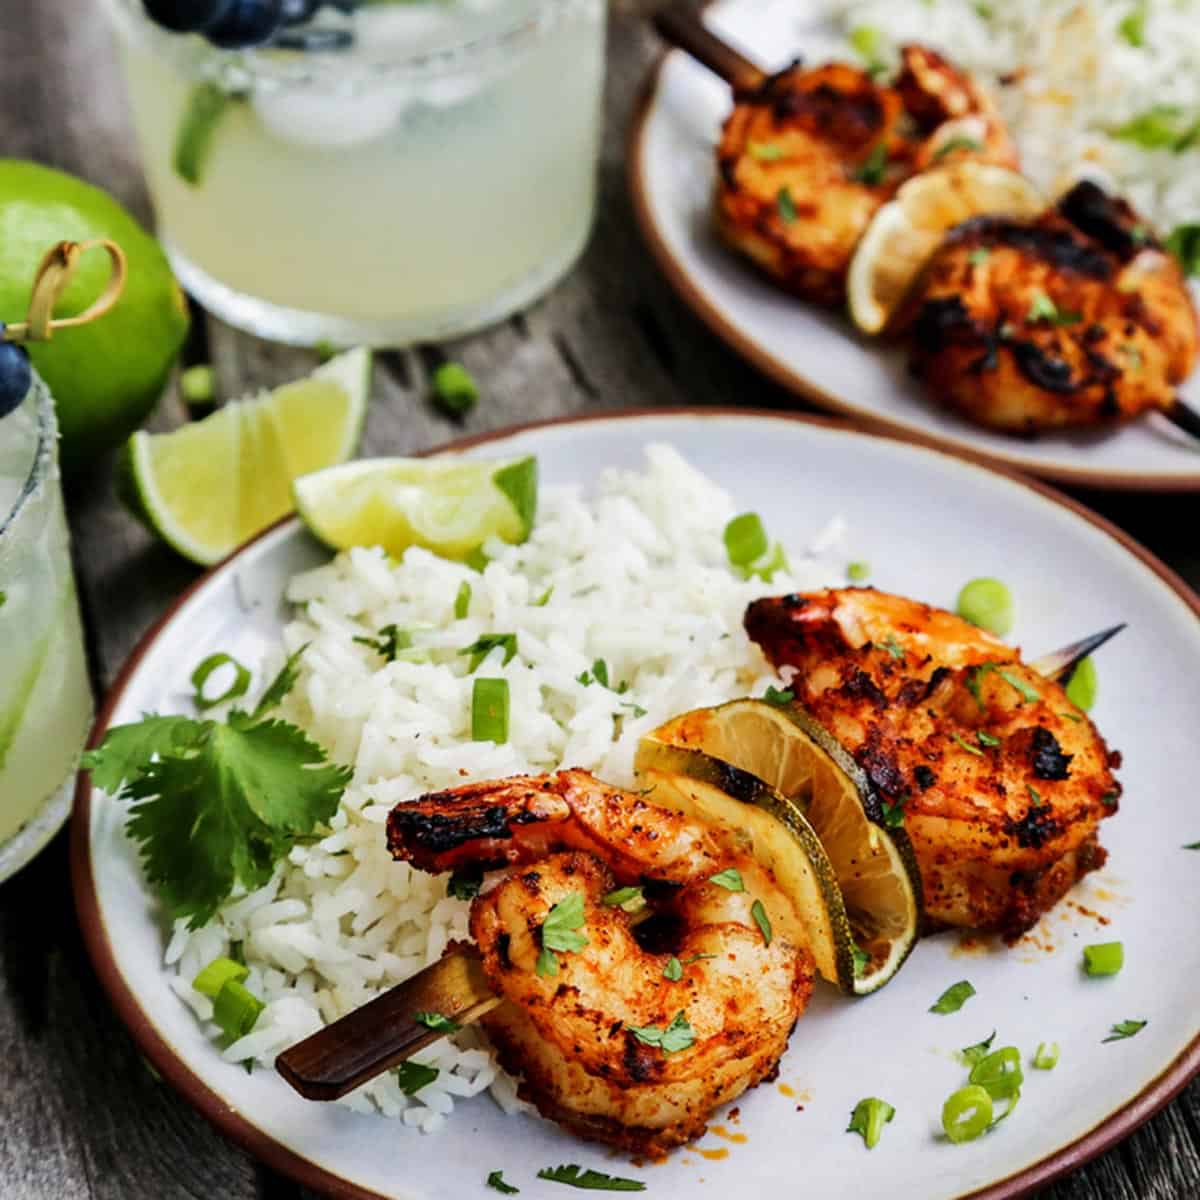 Grilled shrimp skewers on plates with white rice and fresh limes, also glasses of margaritas.